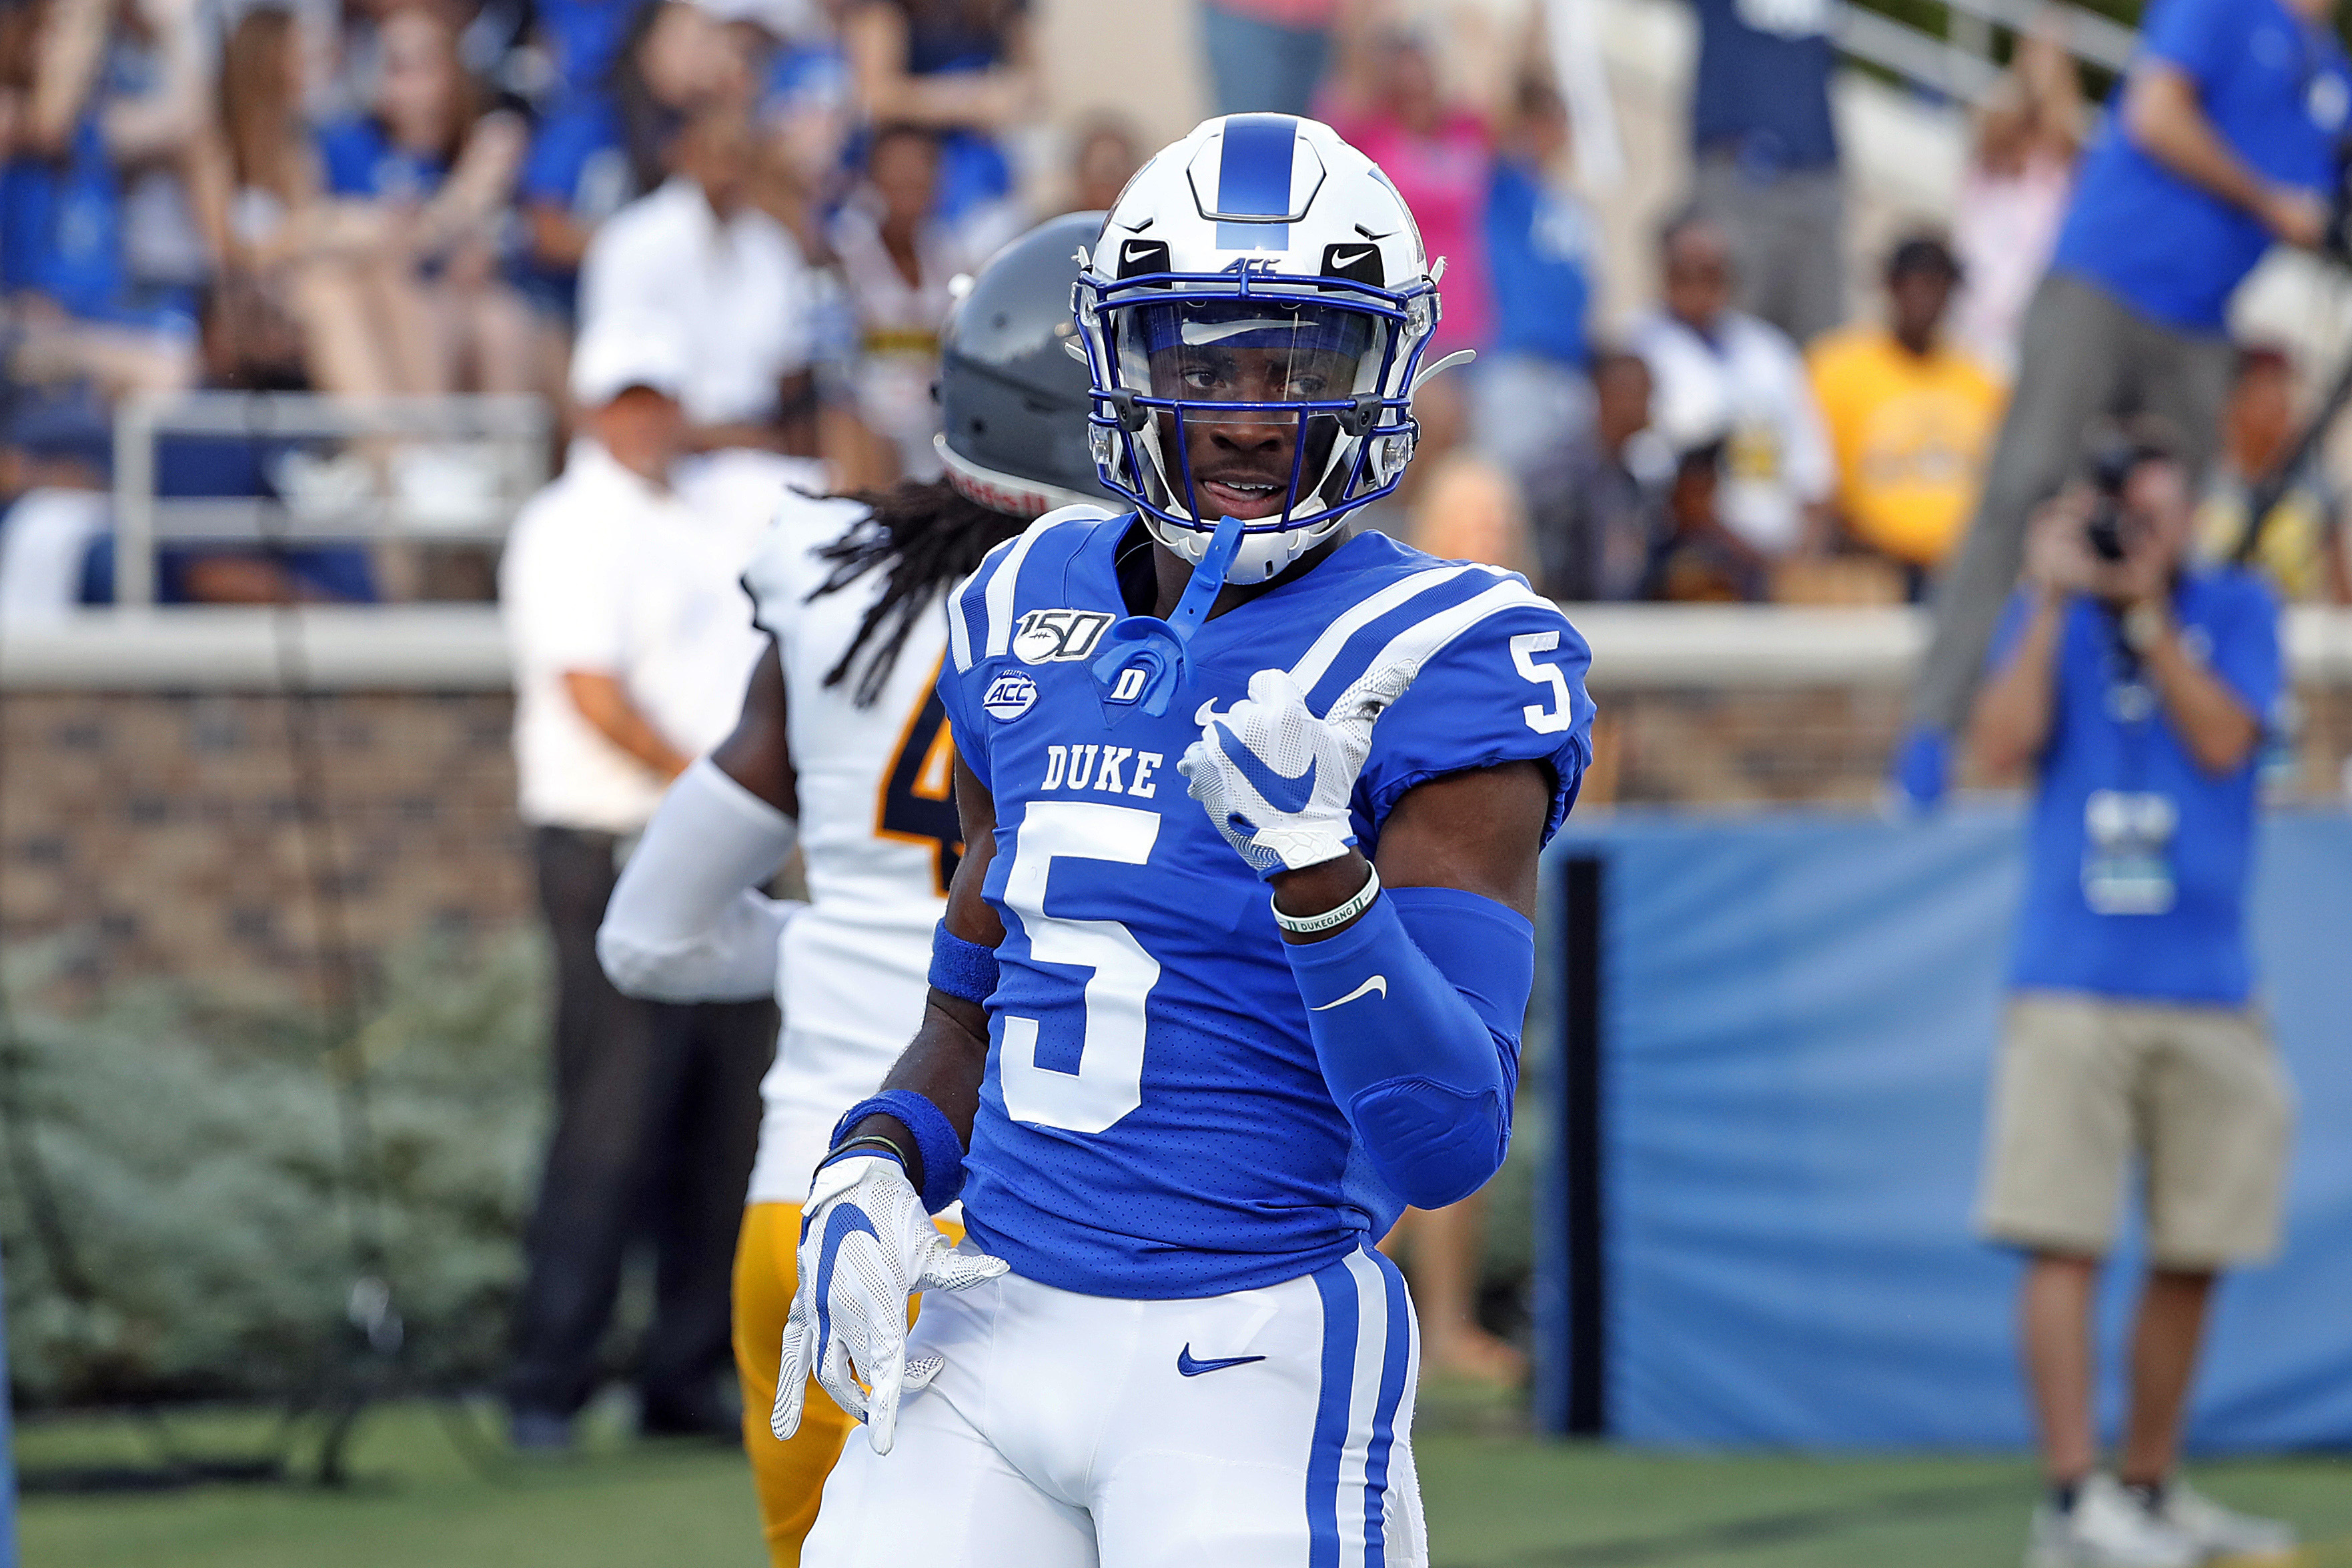 Harris accounts for 5 TDs as Duke rolls to victory